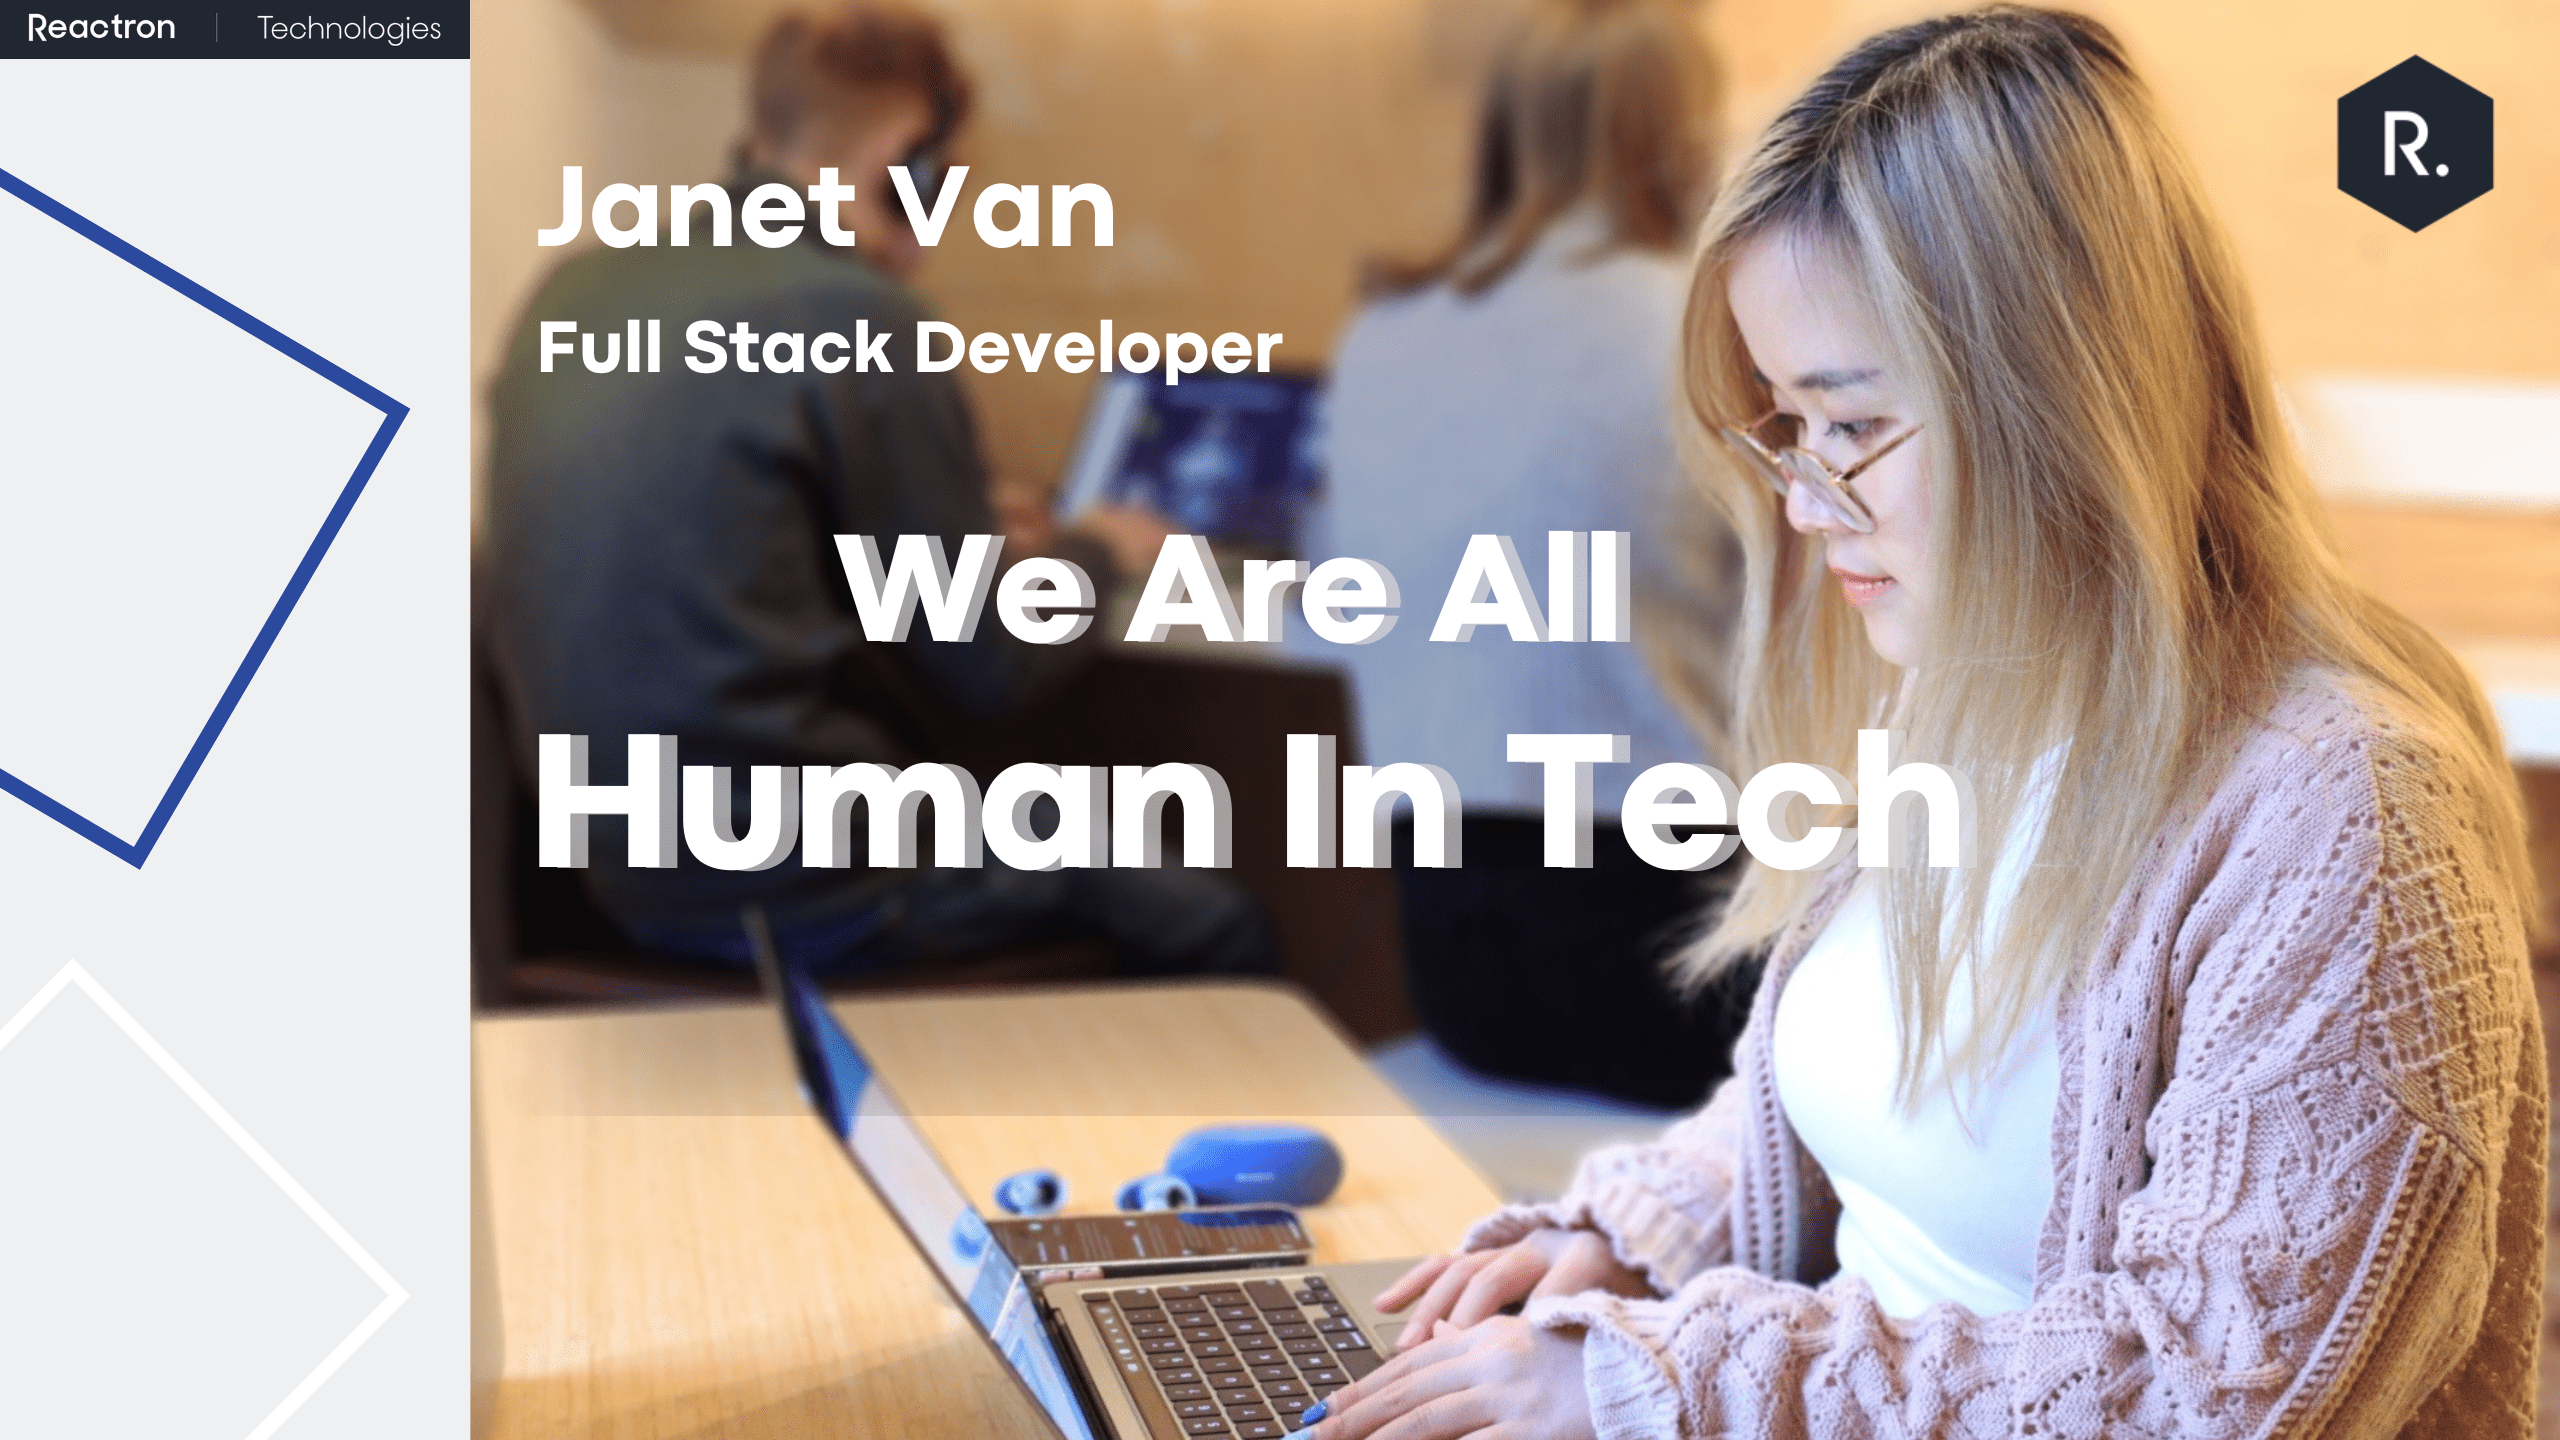 We are all Human in Tech- An equity working culture.